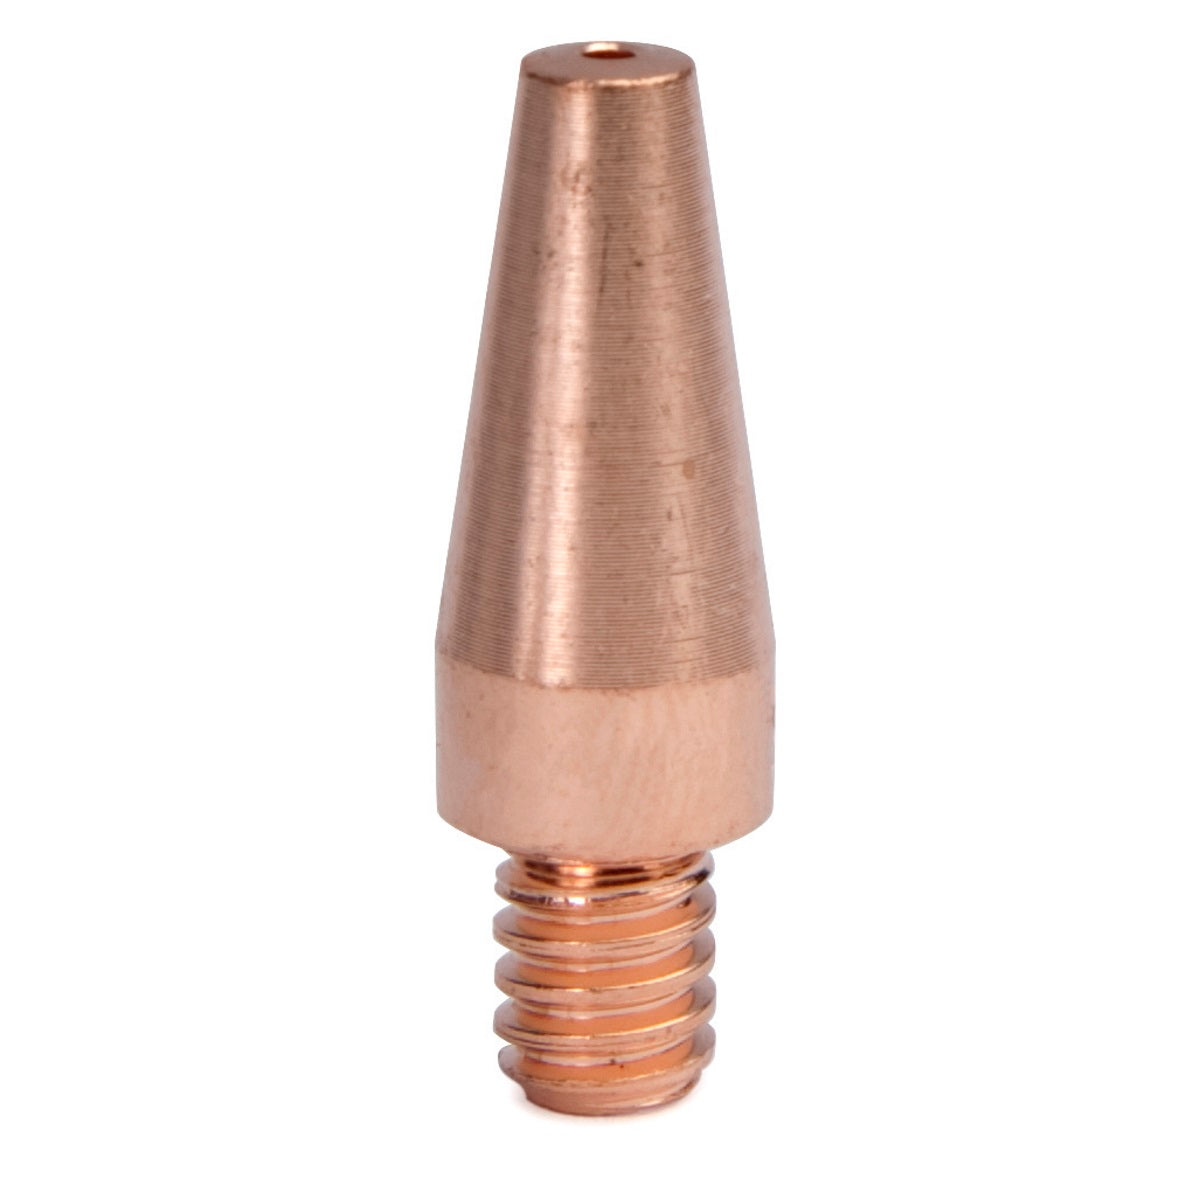 Lincoln KP2744 Tapered Magnum Pro Contact Tips Bulk Pkg/100 (KP2744-0XXT-B100)